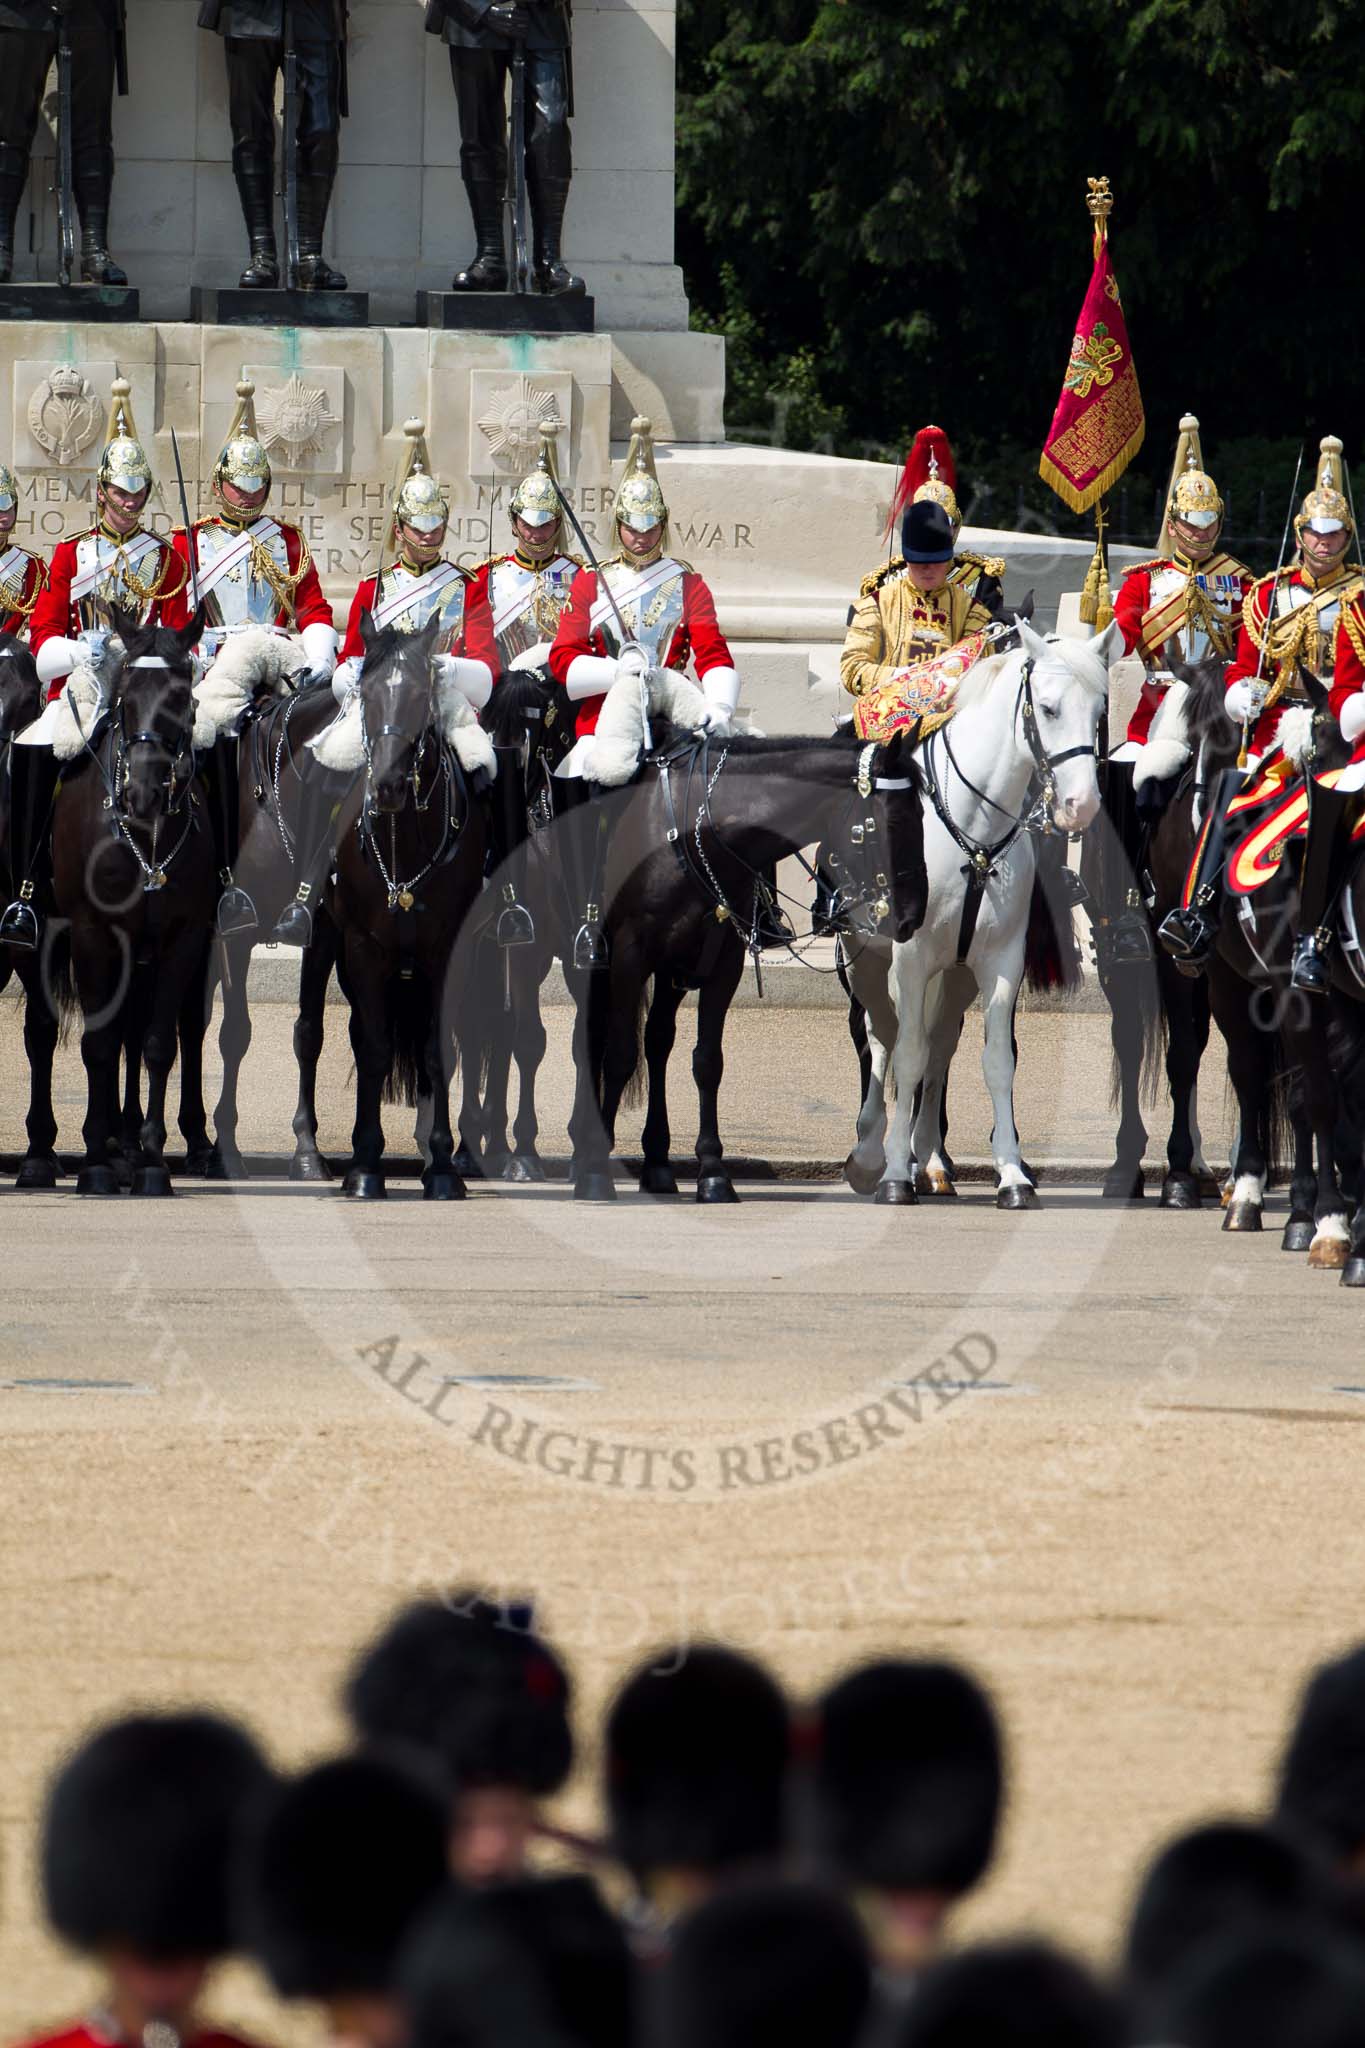 The Colonel's Review 2011: In front of the Guards Memorial, on the left The Life Guards, on the right side the Trumpeter, Standard Bearer, and Standard Coverer..
Horse Guards Parade, Westminster,
London SW1,

United Kingdom,
on 04 June 2011 at 11:40, image #194